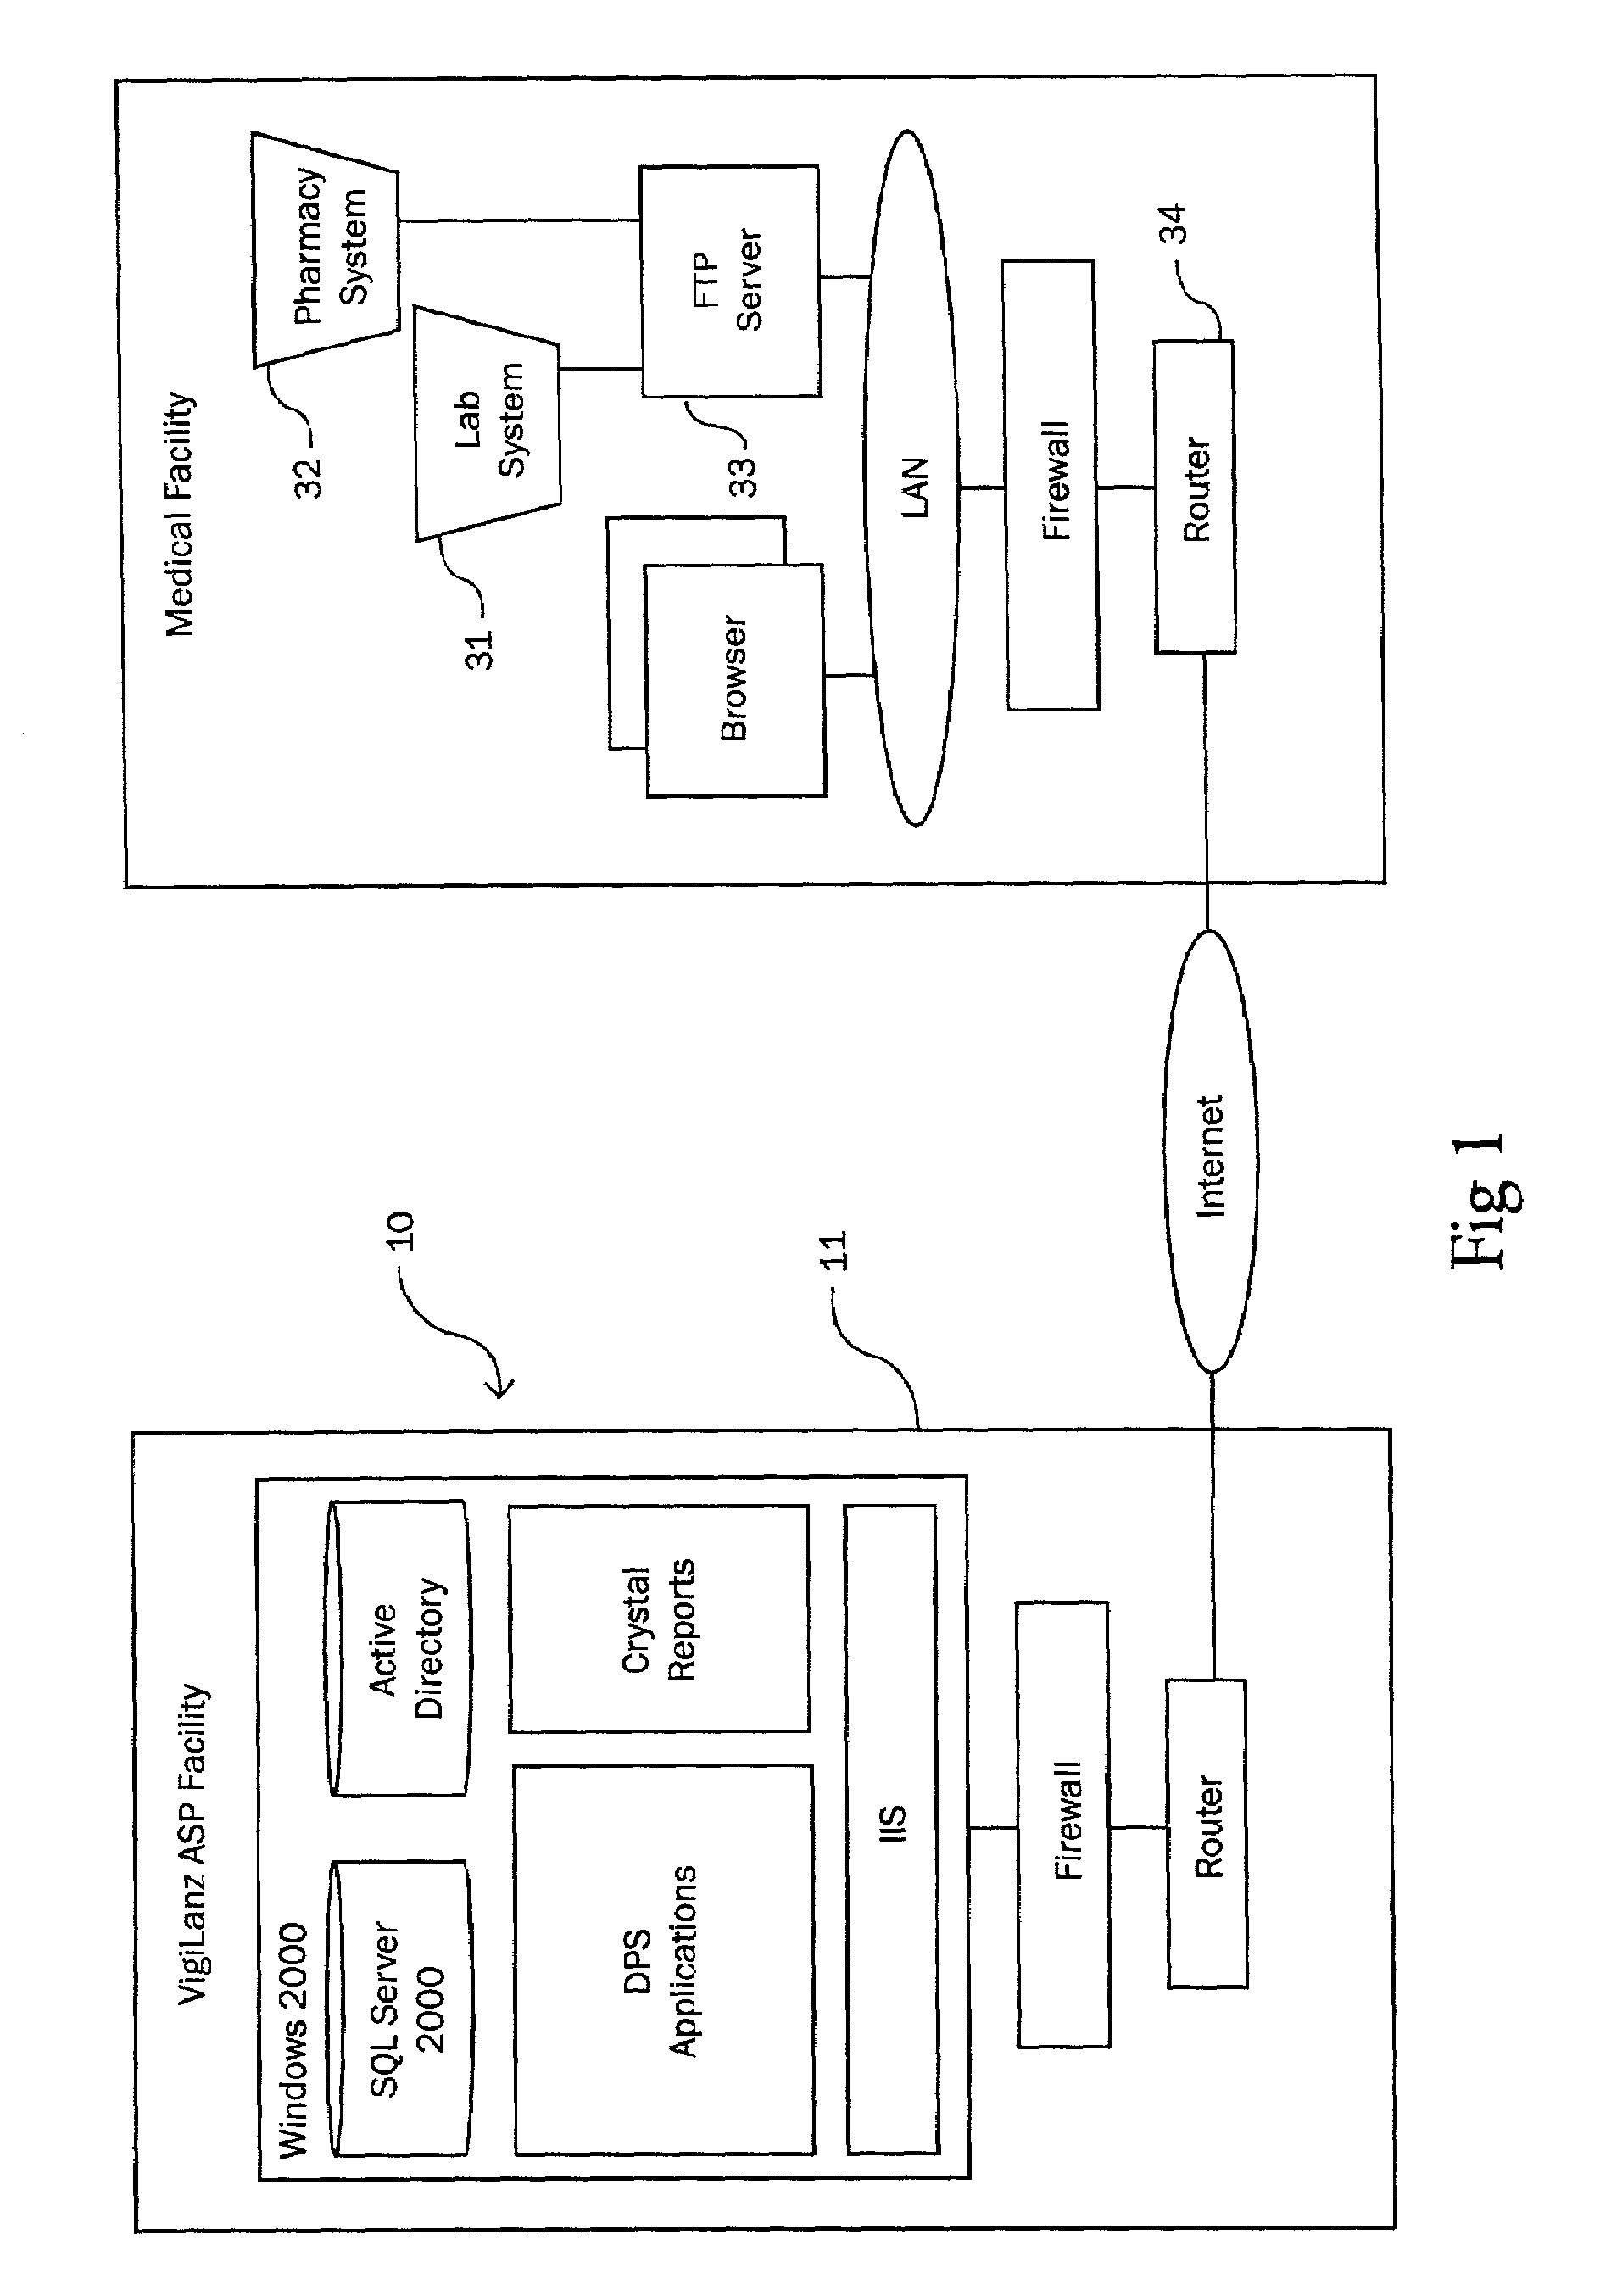 Method and system for identifying and anticipating adverse drug events